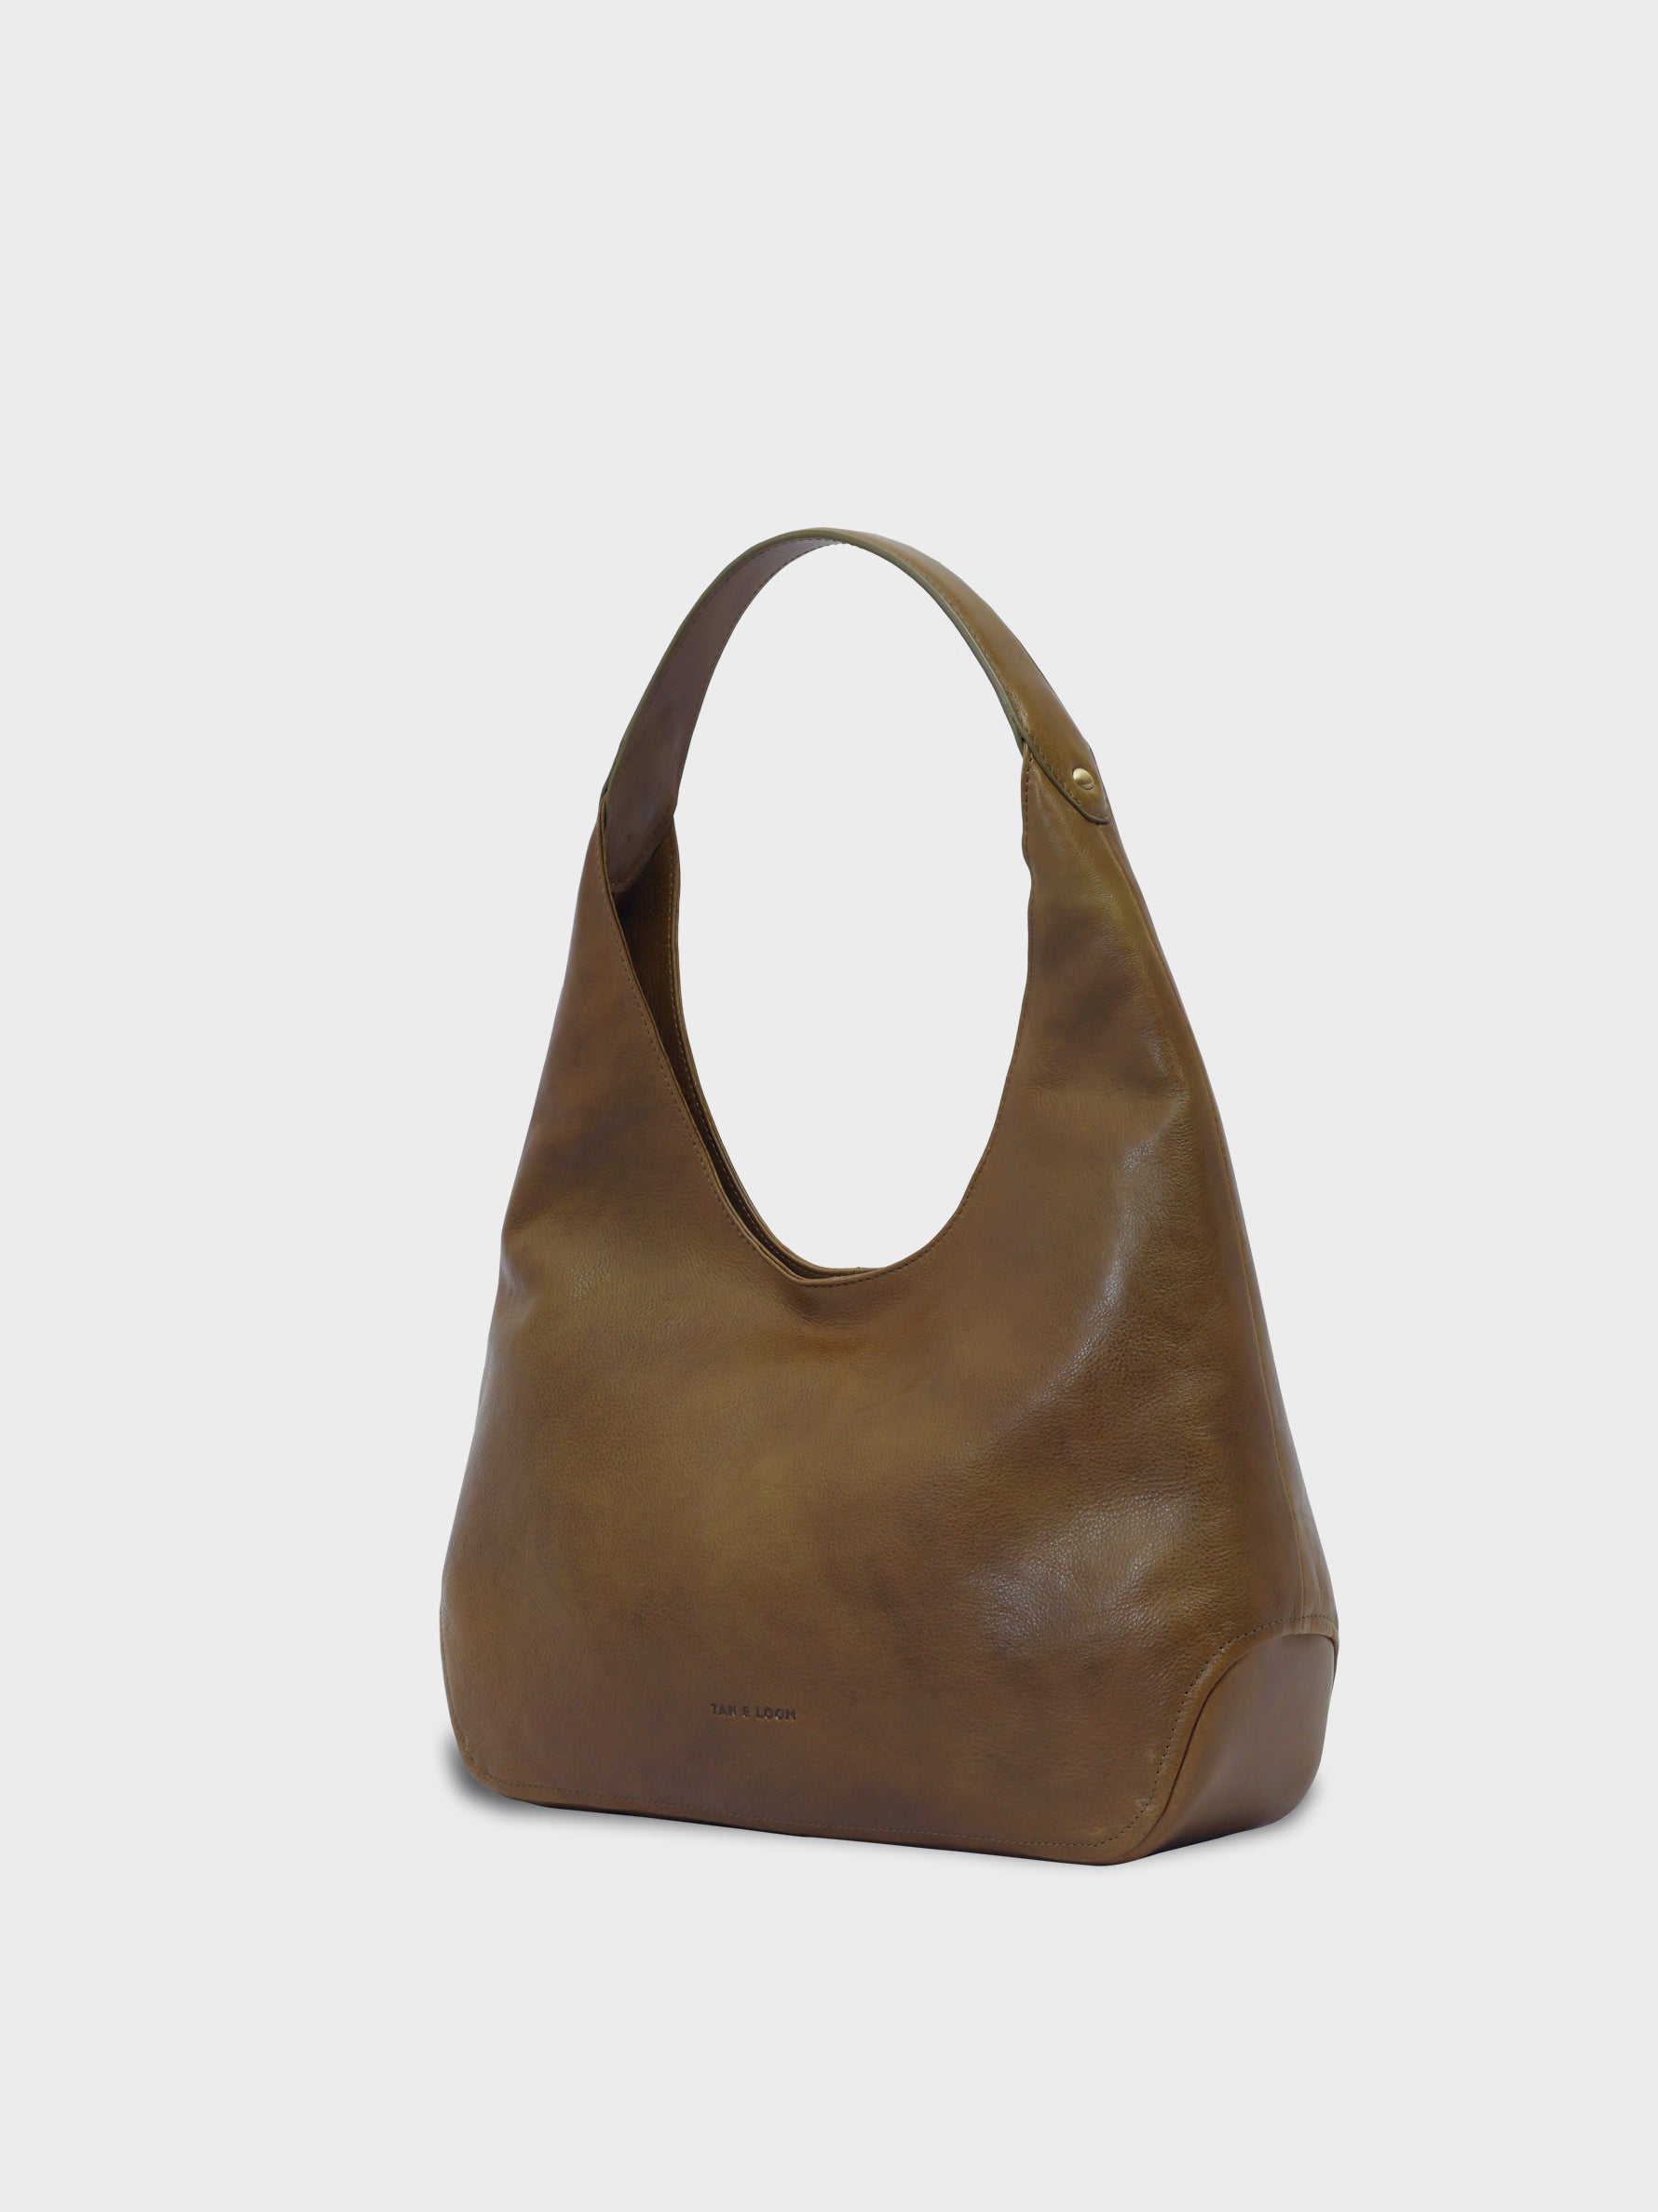 Handcrafted Genuine Vegetable Tanned Leather Hippie's Hobo Olive Green for Women Tan & Loom